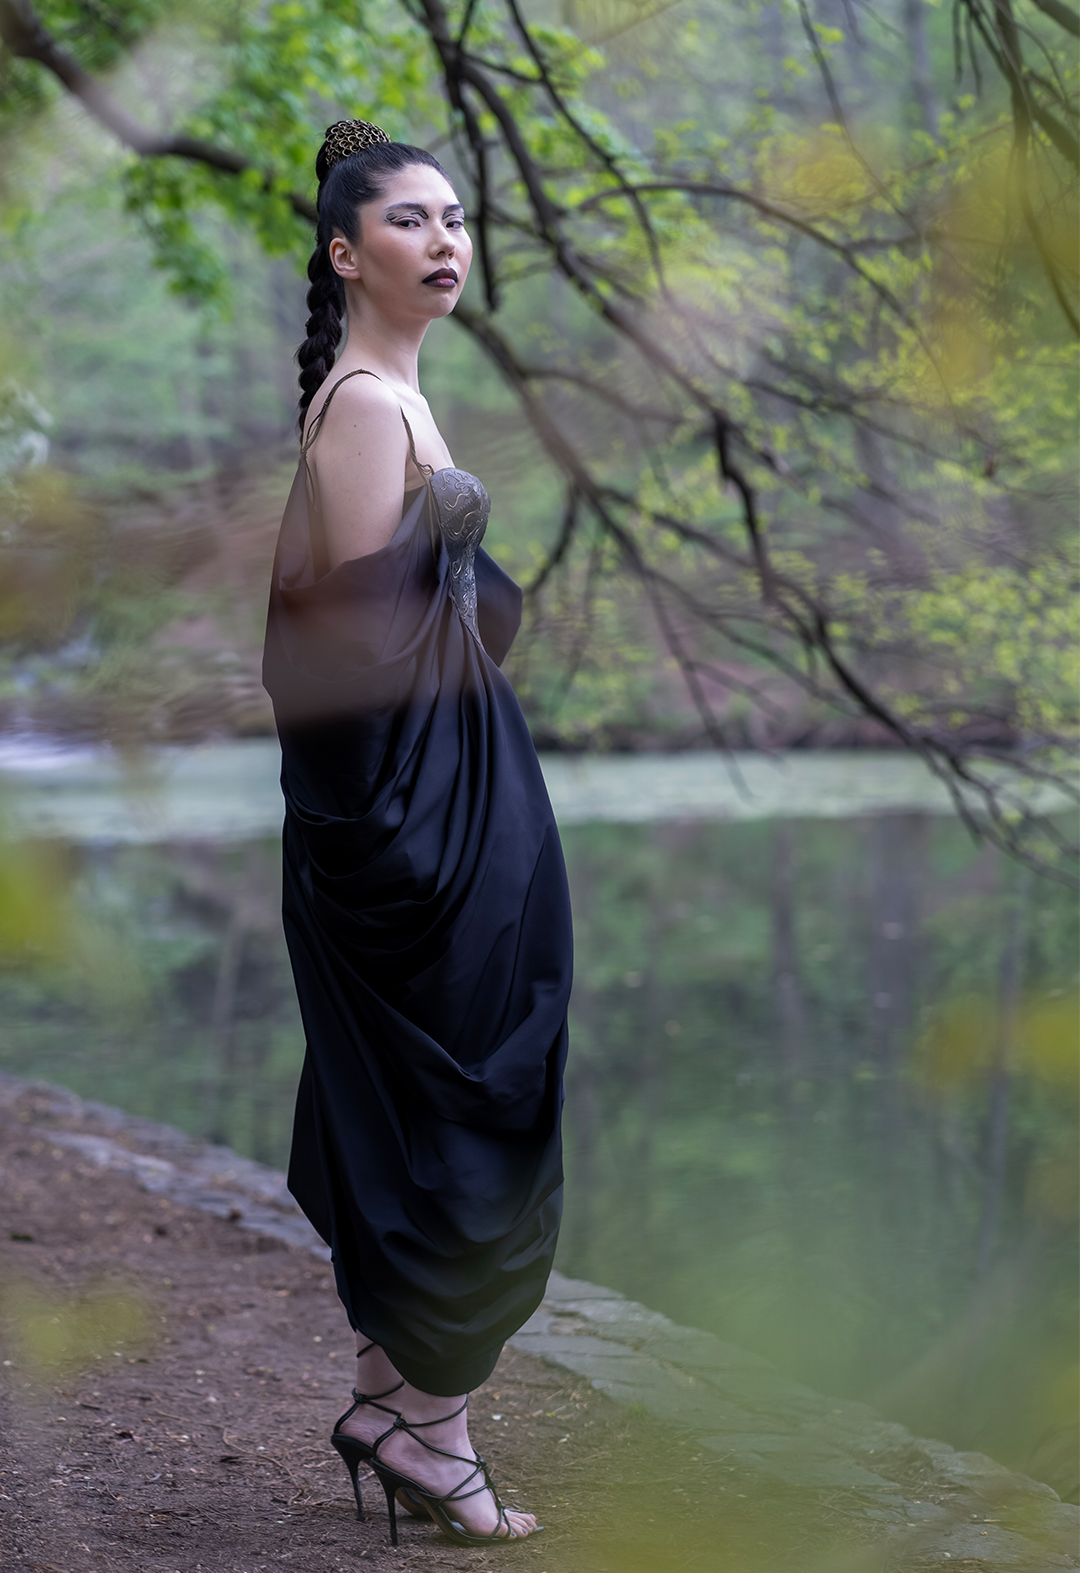 A woman in a black-and-gold dress stands with poise and elegance. Her dress exudes sophistication and elegance, with the flowing fabric draping gracefully around her legs emphasizing her confident demeanor. The surrounding environment features a rocky terrain in the forest. This image exudes an air of mystery and intrigue, leaving much to the imagination regarding the woman’s fierce attitude.